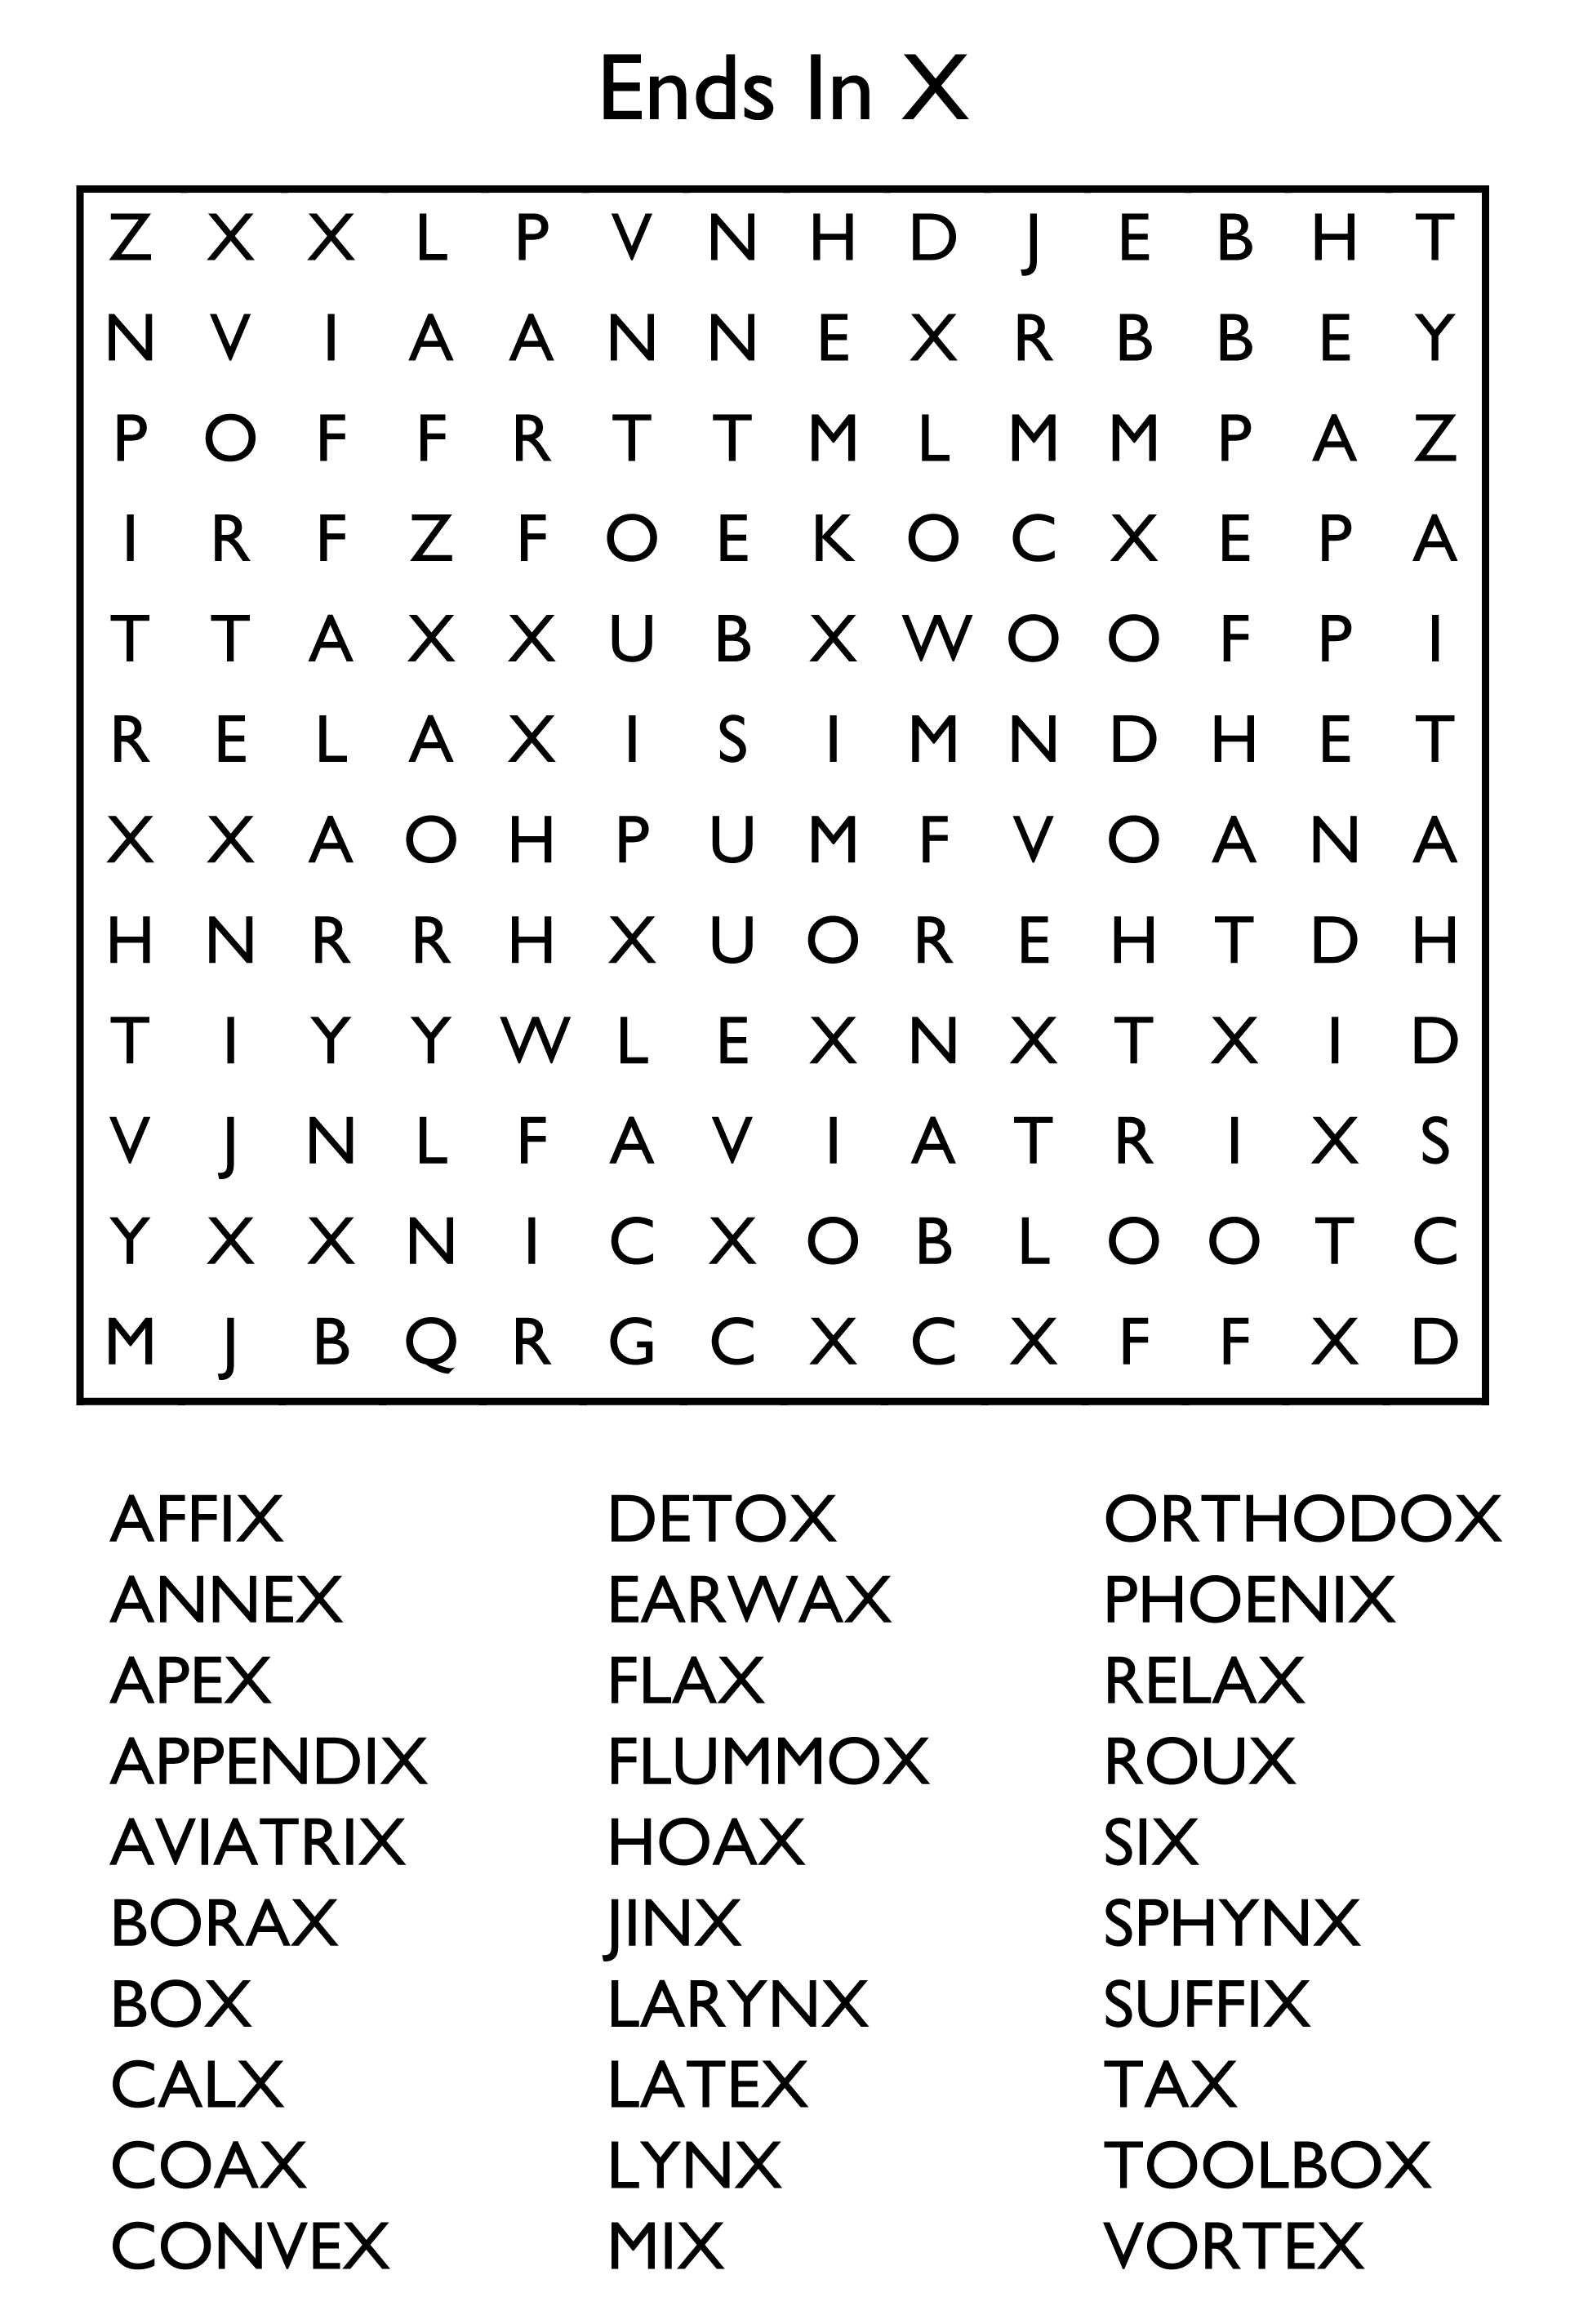 Free Printable Word Search Puzzle - Ends in X